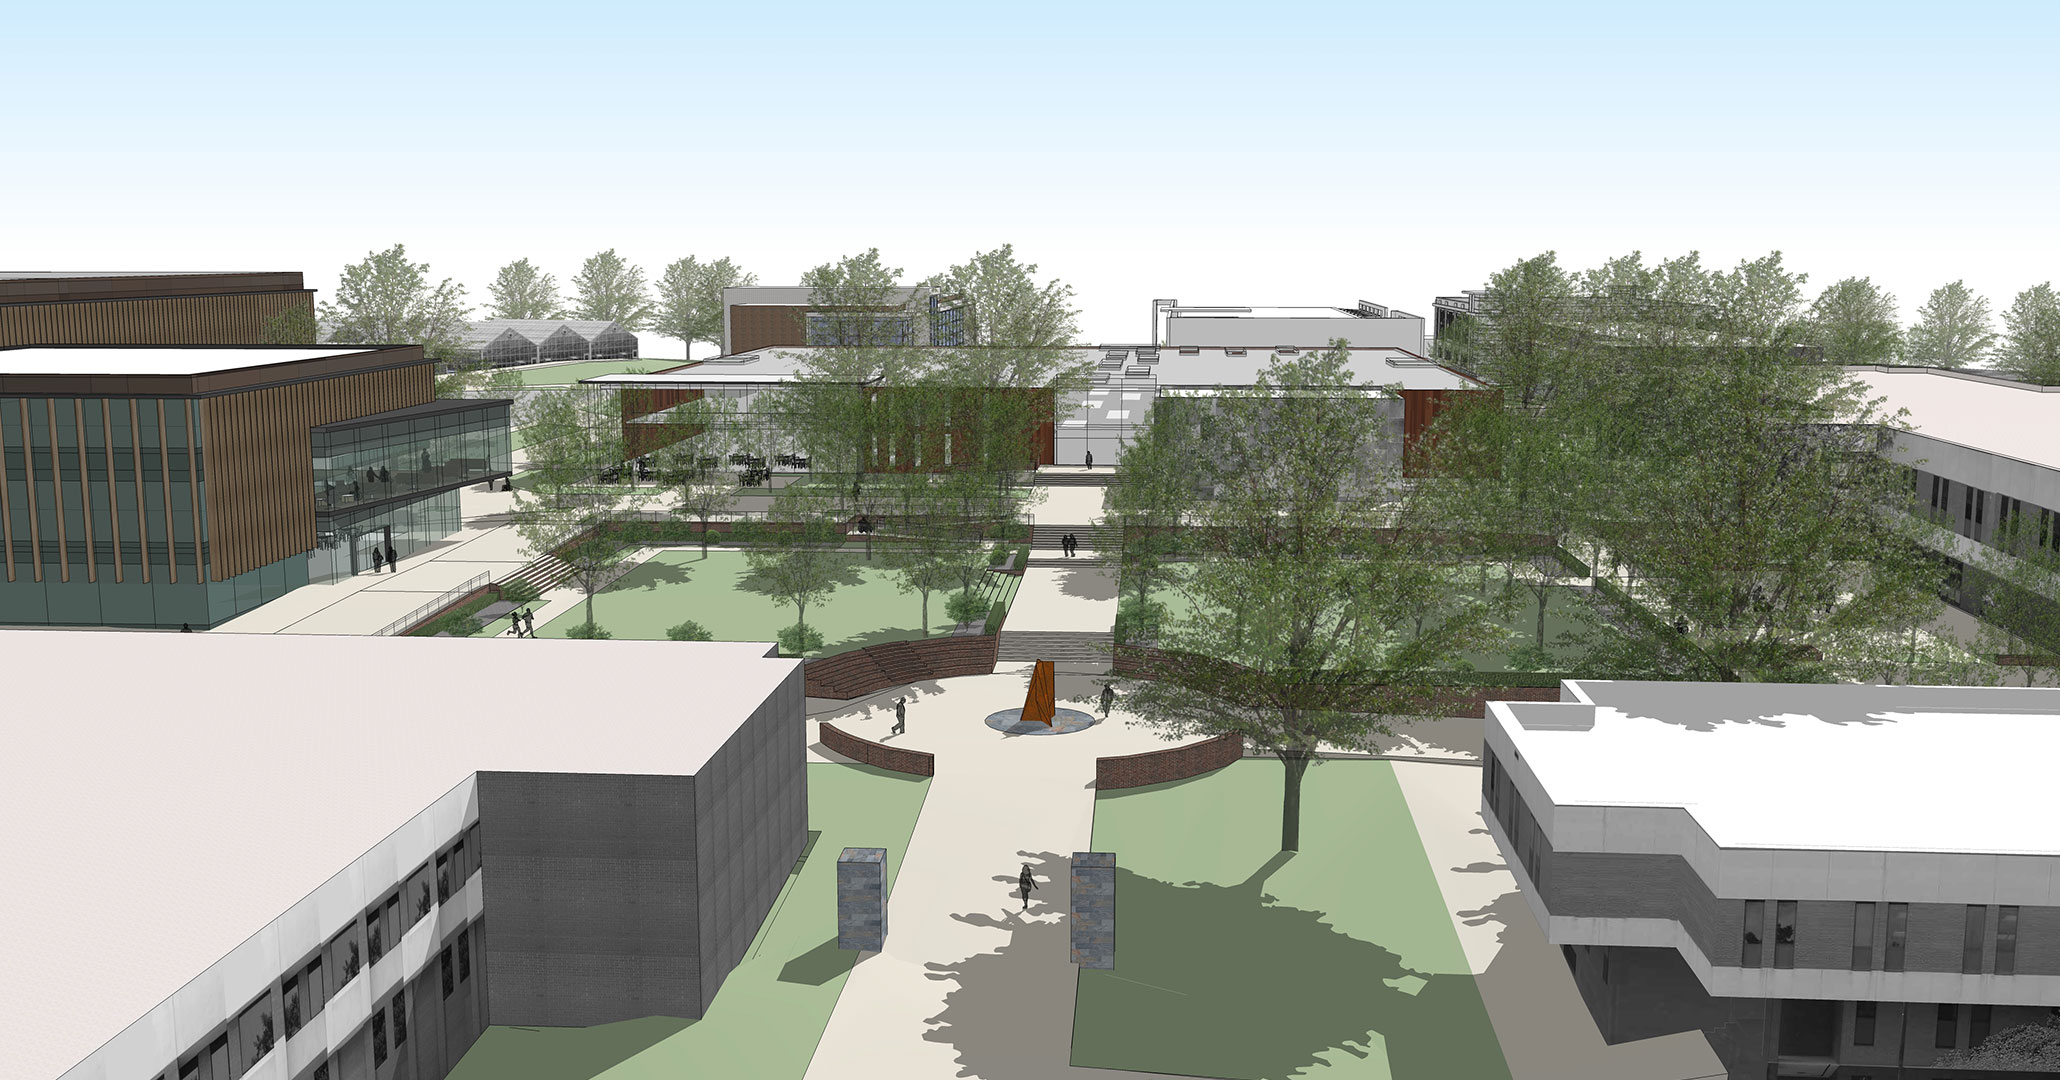 Clemson University hired Boudreaux architects to plan the exteriors and pathways of the Southeast Precinct.